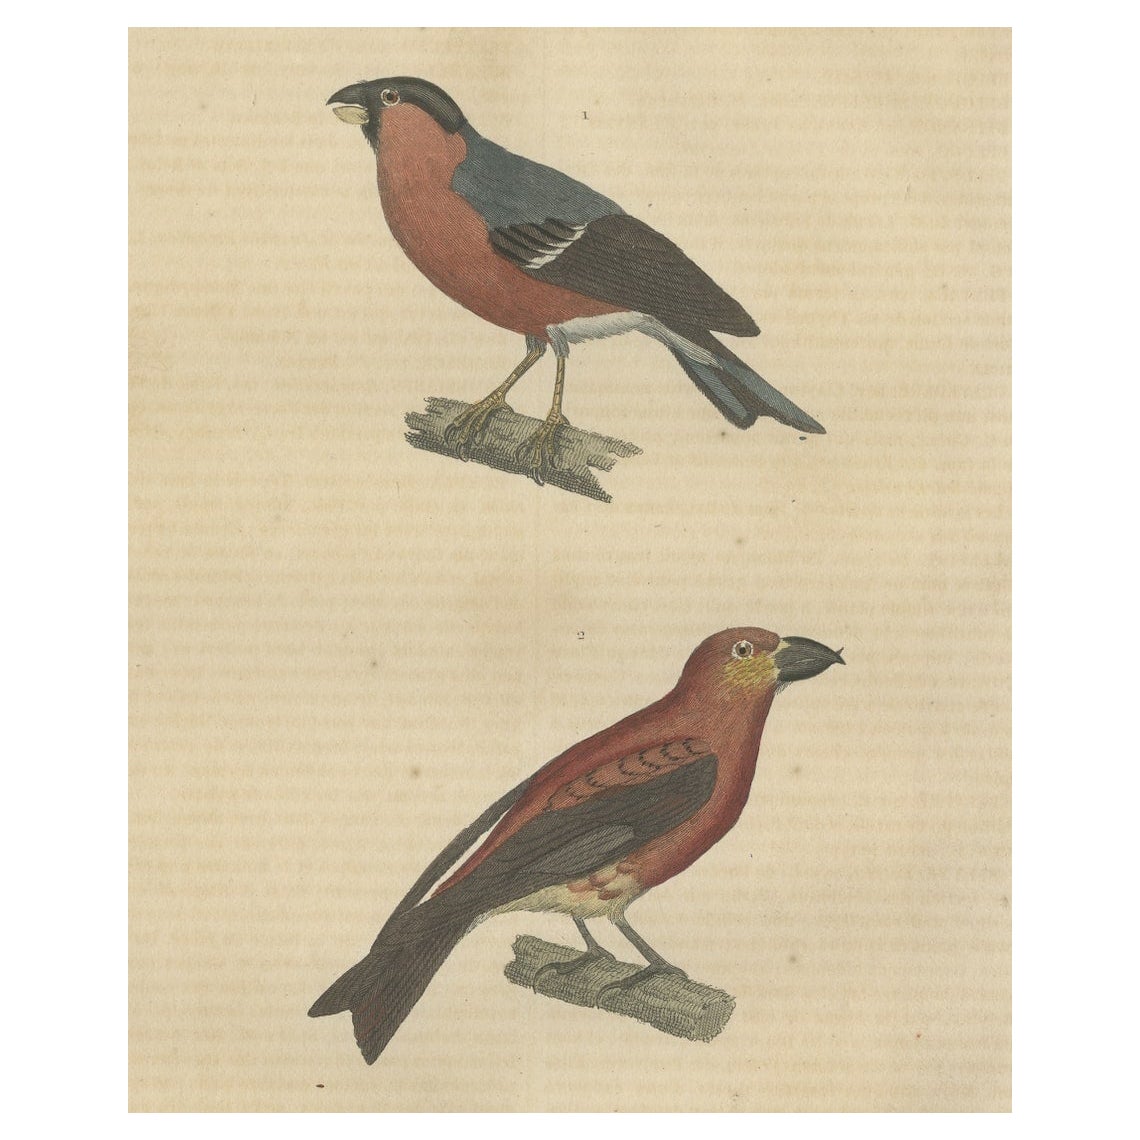 Old Hand-Colored Bird Print of a Bullfinch and a Common Crossbill, 1845